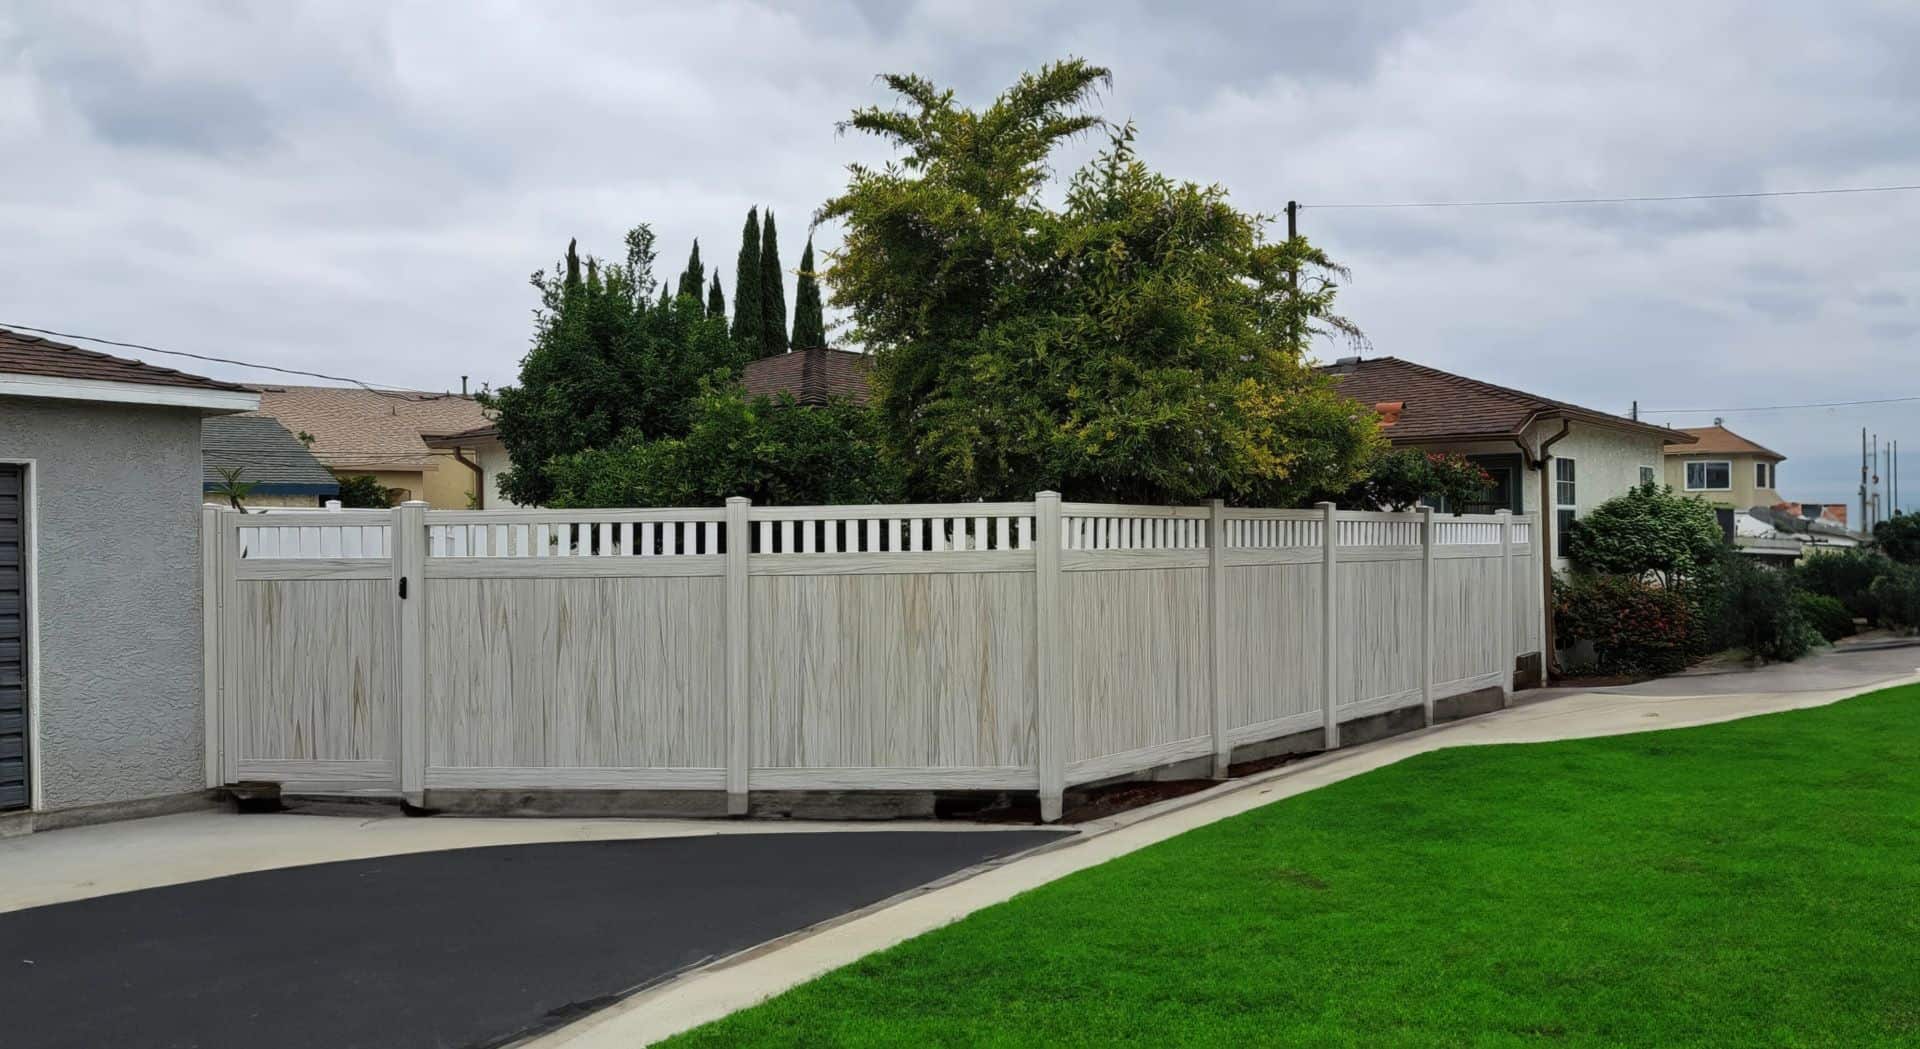 Vinyl weathered aspen colored fence, grassy lawn, trees, garage, and concrete sidewalk in serene outdoor setting.